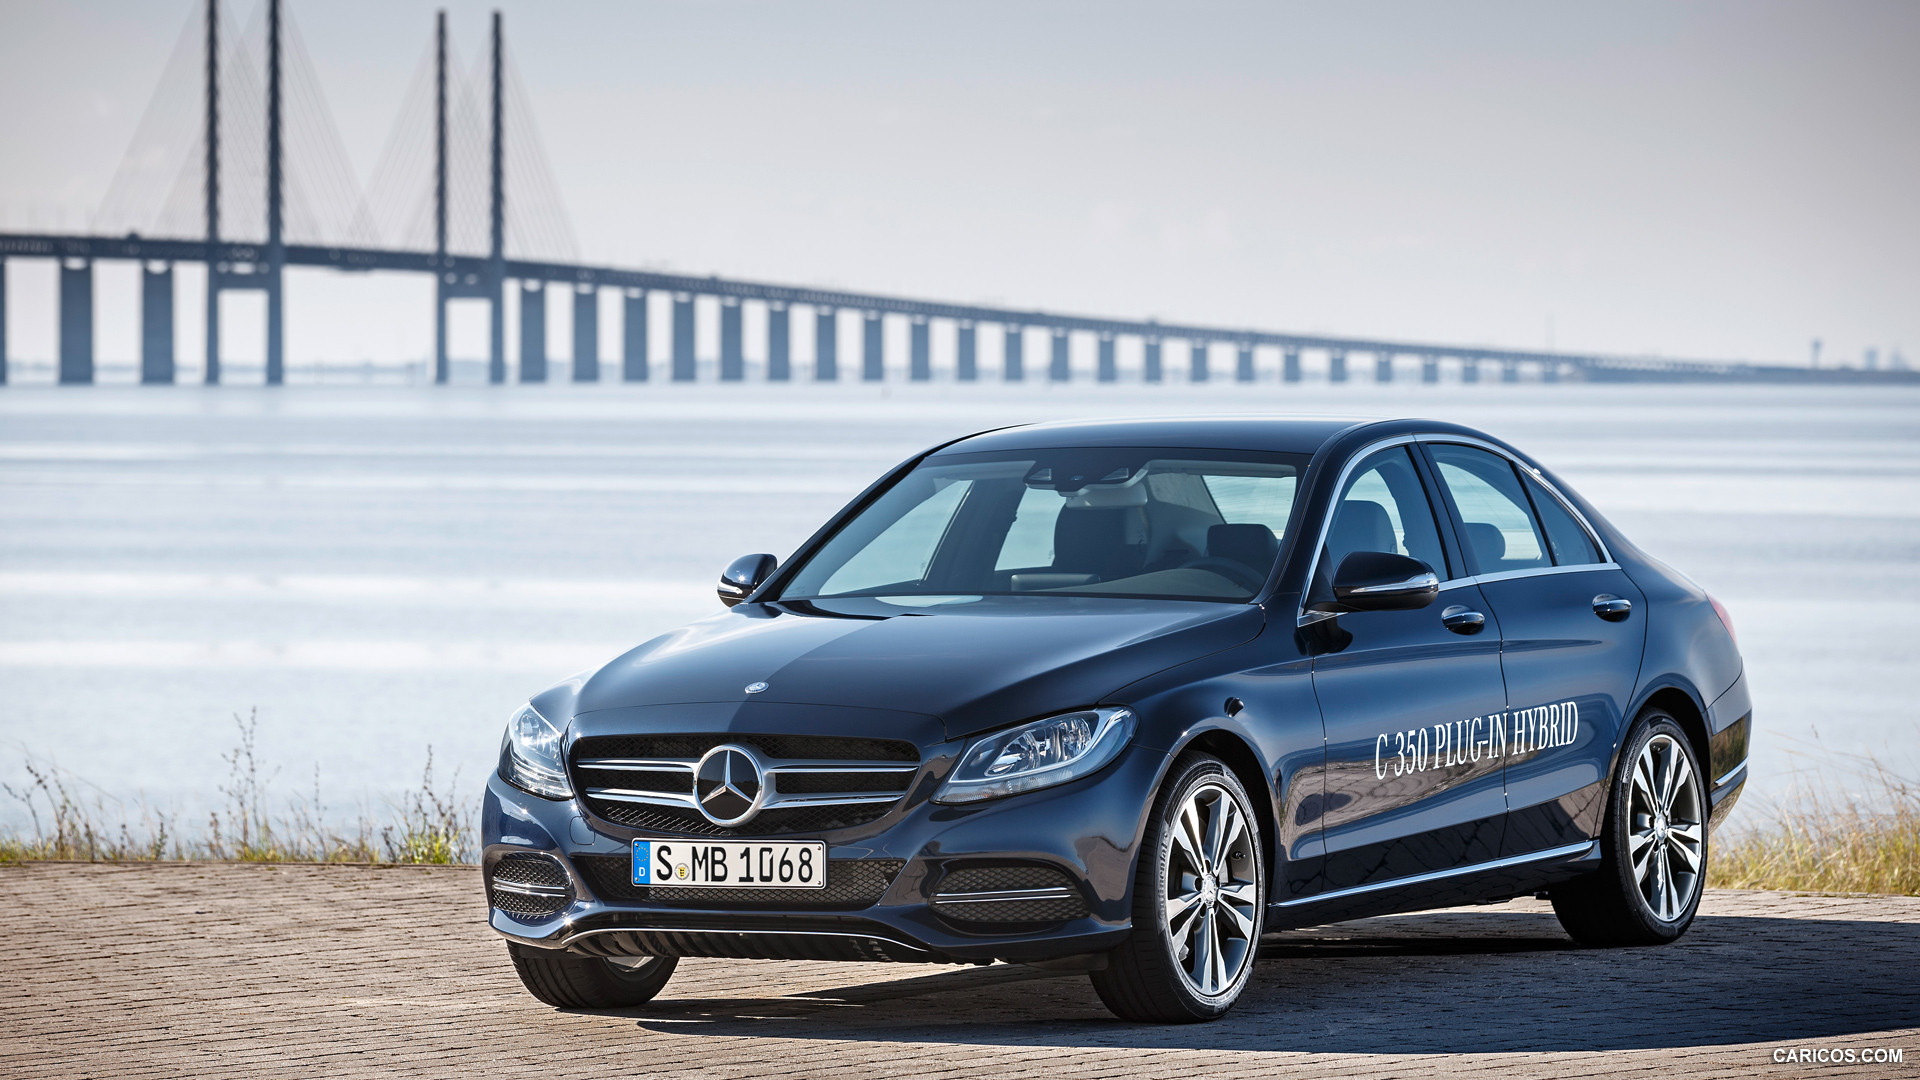  2016 Mercedes-Benz C350 Plug-In Hybrid - Front, #1 of 21